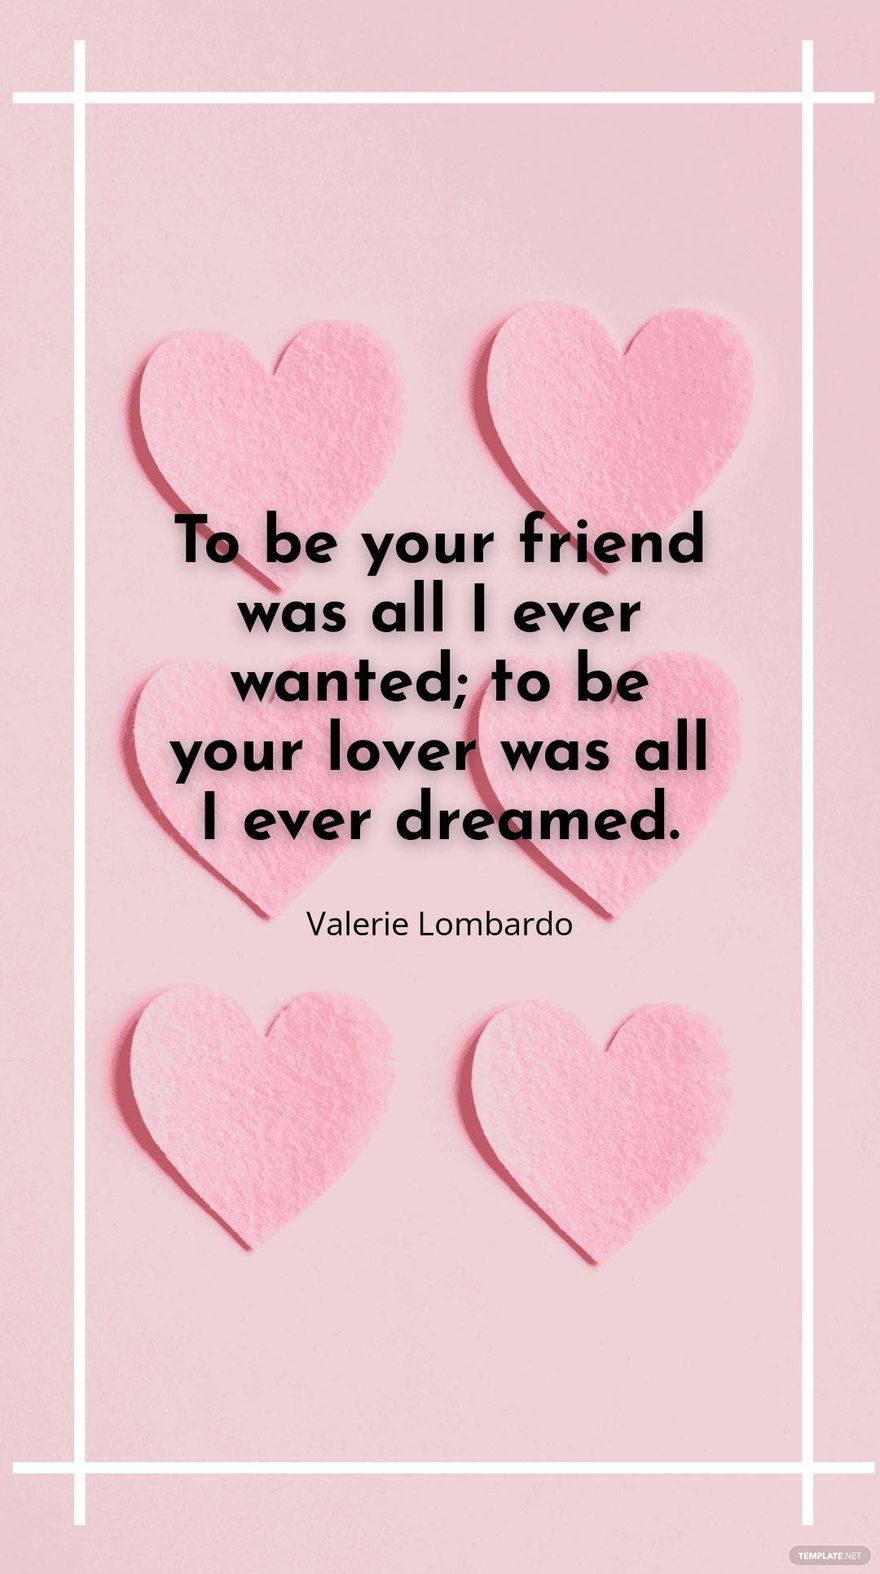 Valerie Lombardo - “To be your friend was all I ever wanted; to be your lover was all I ever dreamed.”